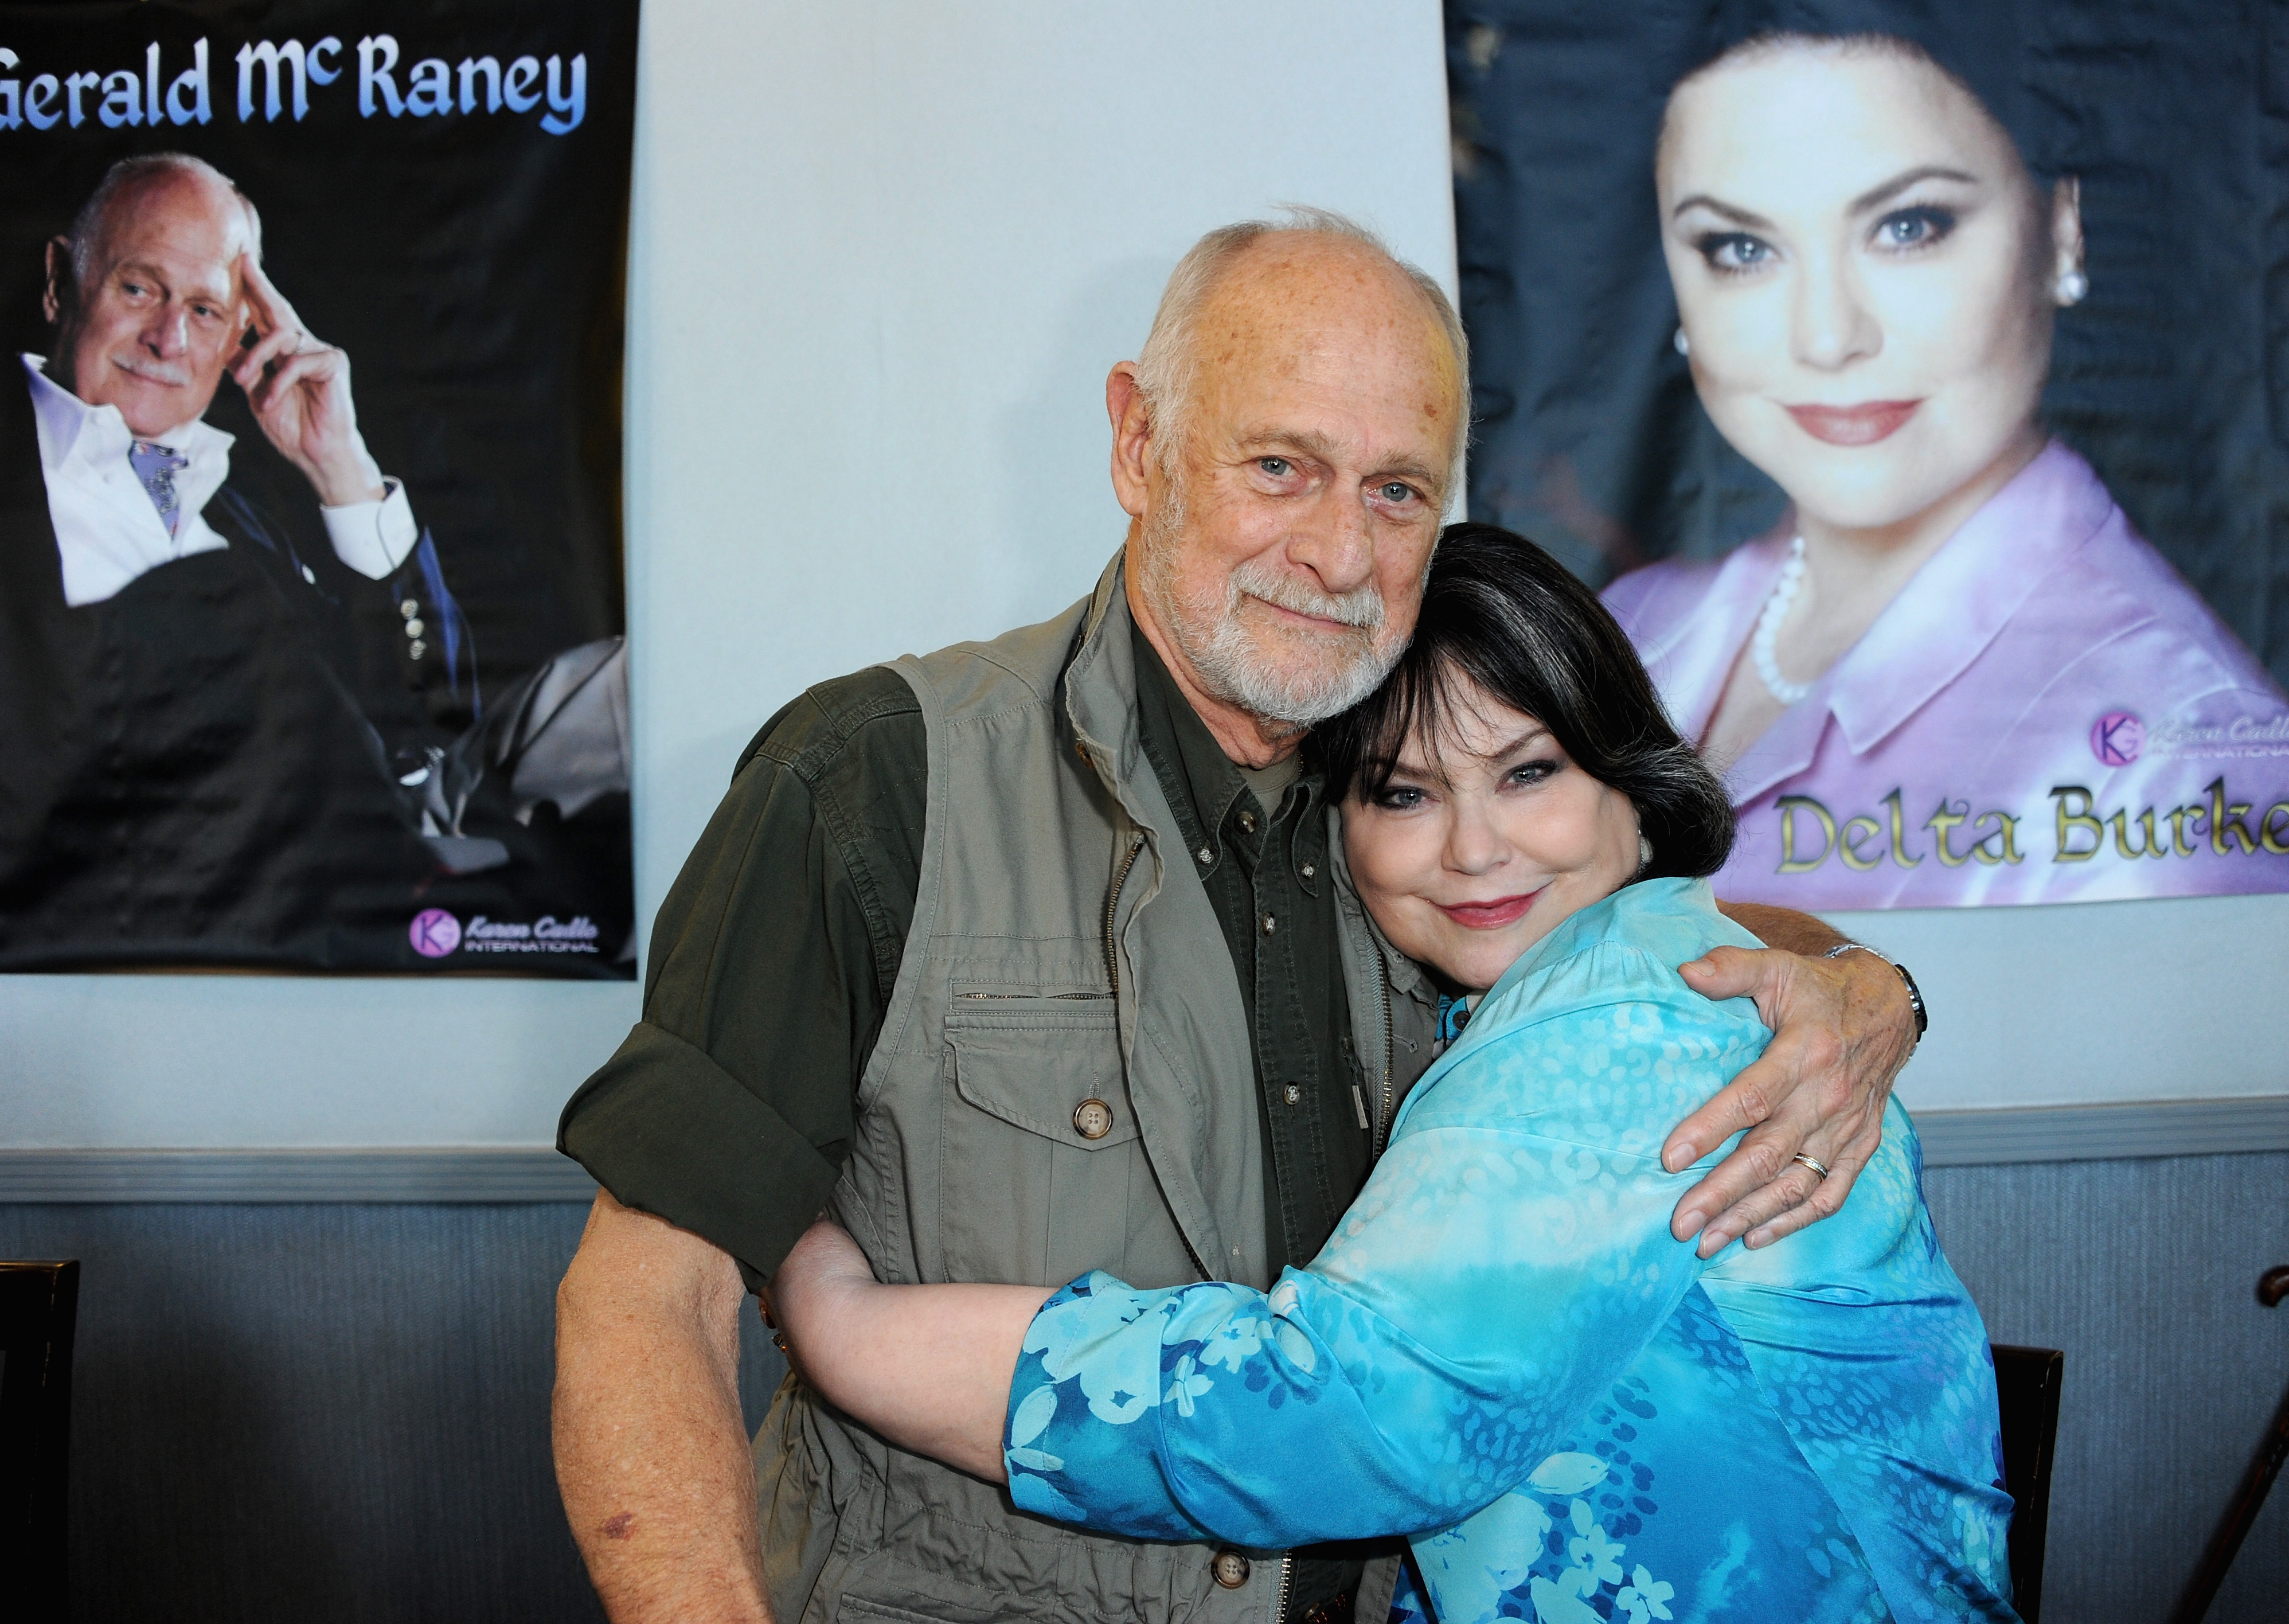 Gerald McRaney and Delta Burke at the 2020 Hollywood Show held at Marriott Burbank Airport Hotel on February 1, 2020 in Burbank, California | Source: Getty Images